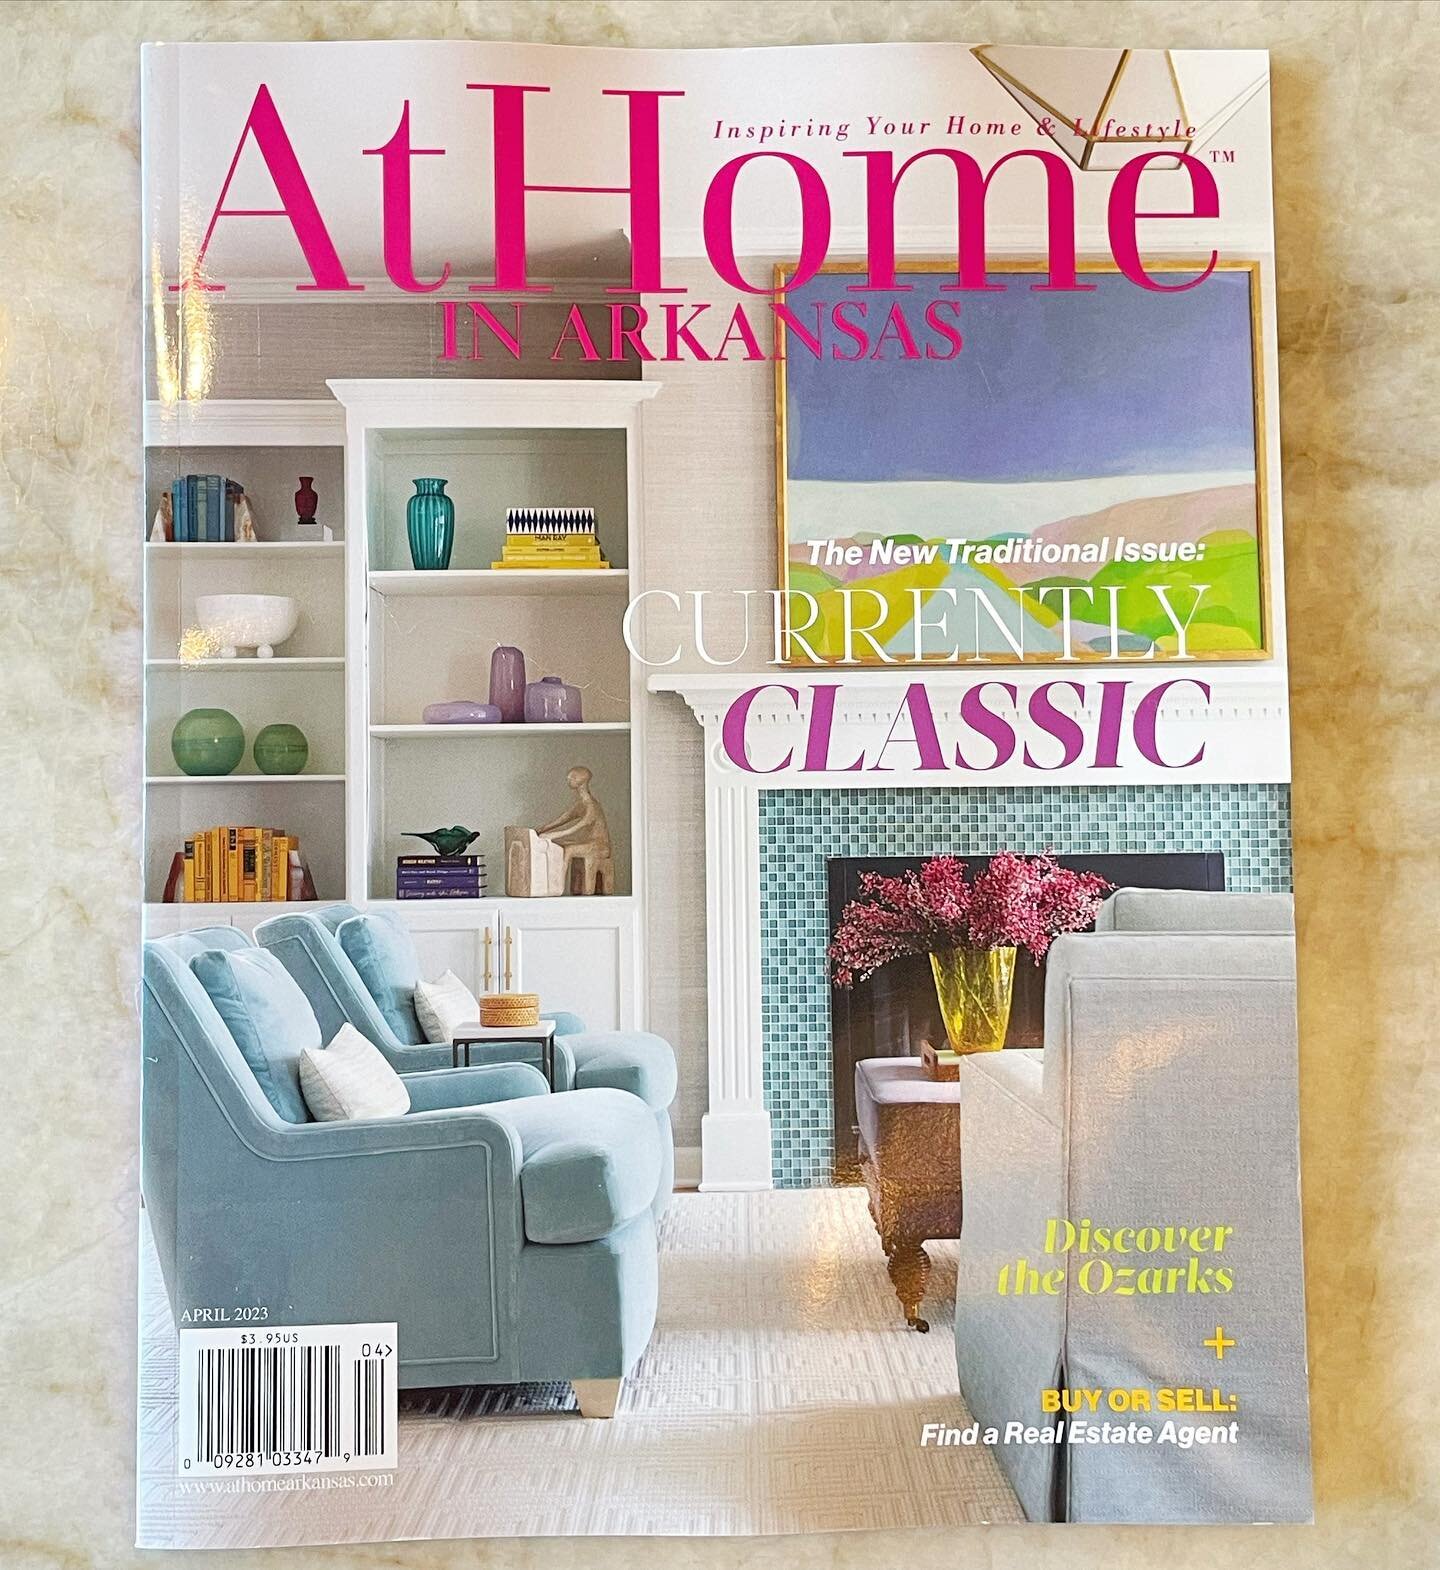 Check out the April issue of @athomearkansas to see one of my latest projects! Sneak peek on the cover ✨

Photography by @rettpeek